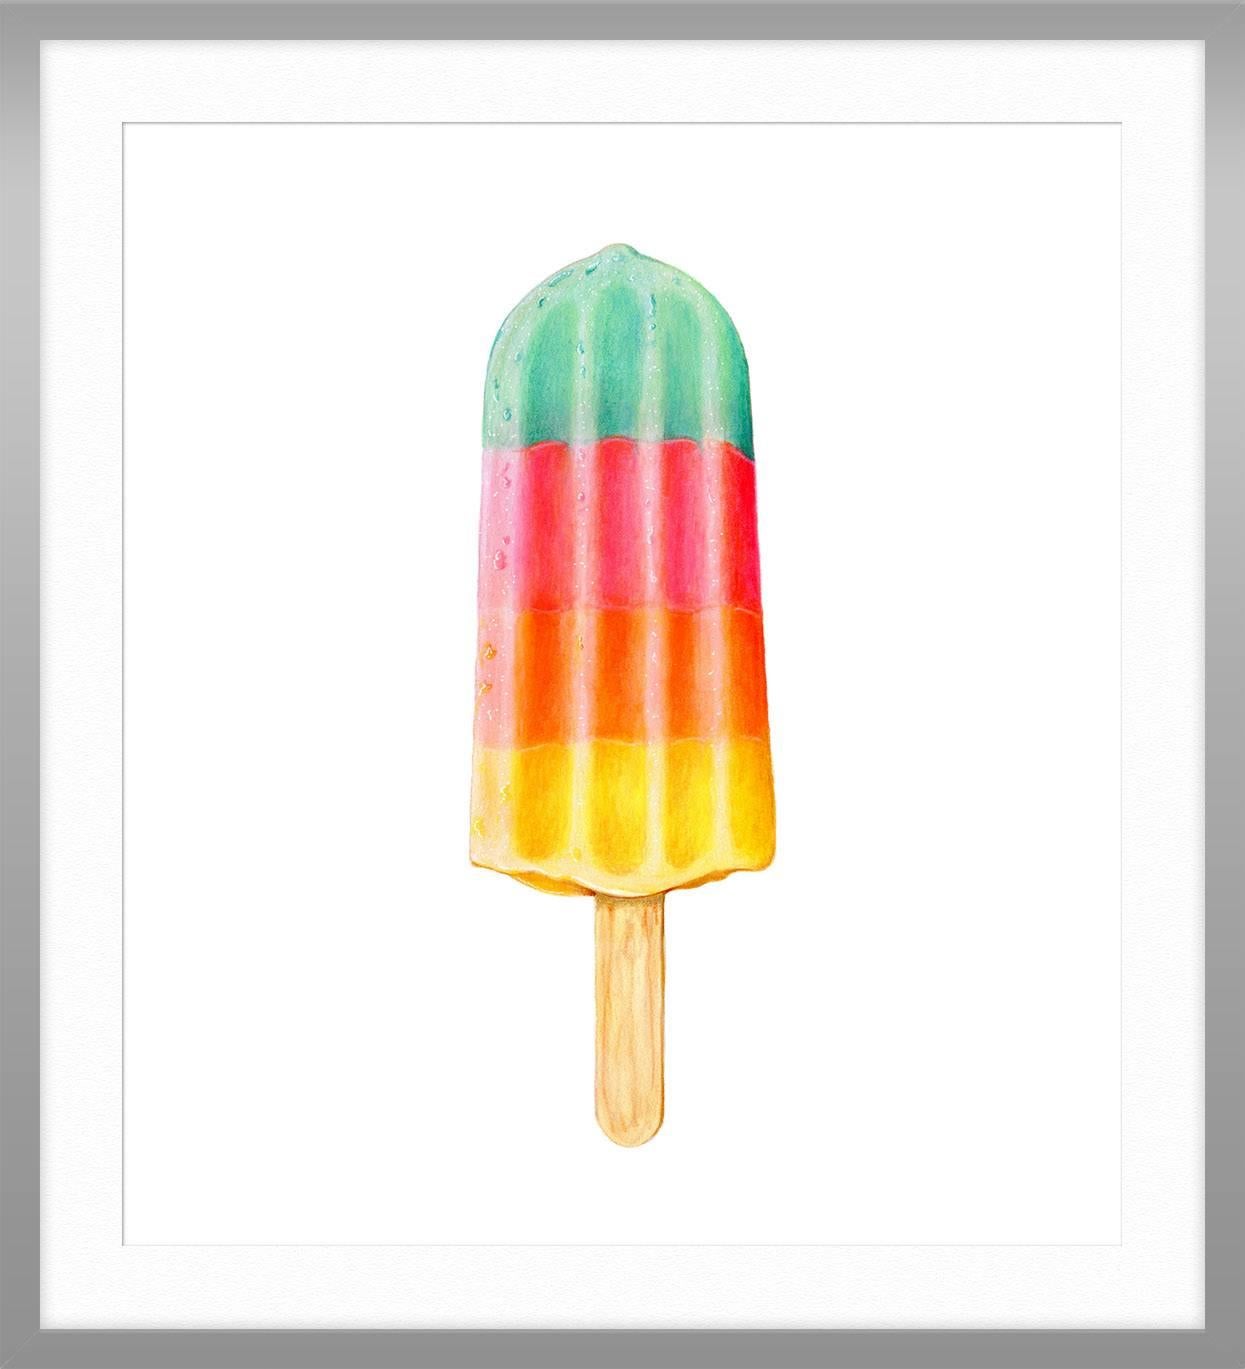 ABOUT THIS PIECE: As a kid the ice cream truck was a neighborhood fixture on summer days. Iconic popsicles will always remind me of those warm afternoons, drying off in the sun after running through the sprinklers, listening with anticipation for